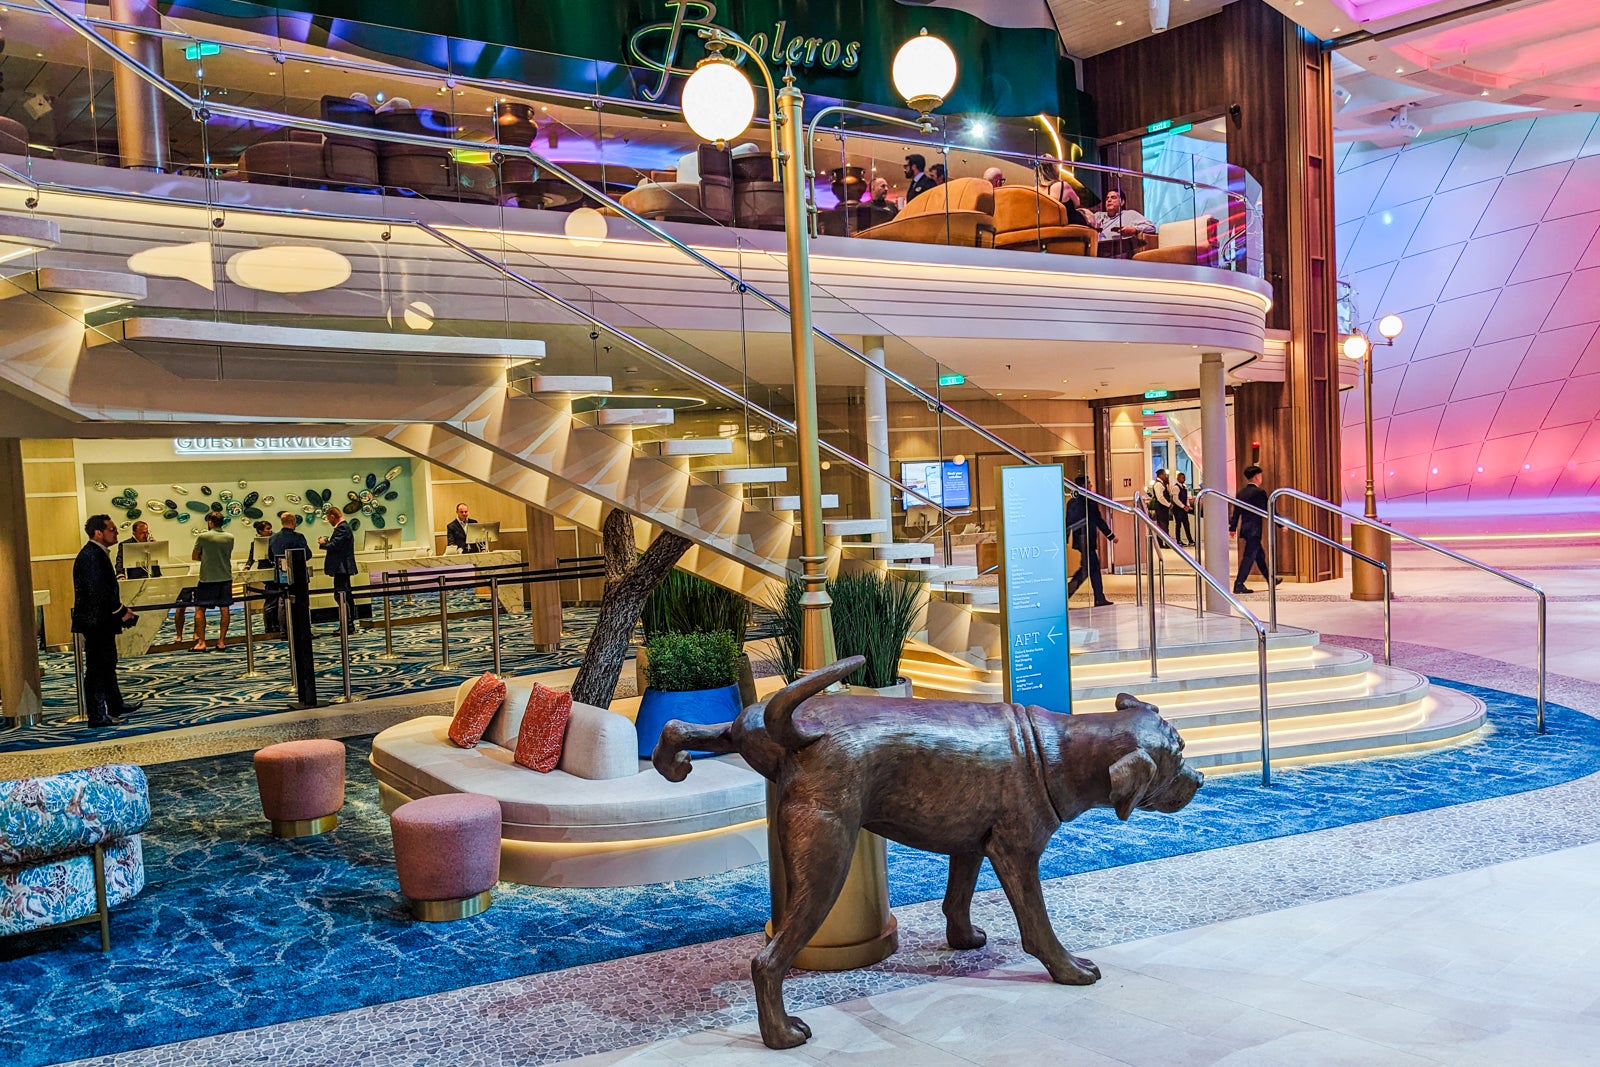 Statue of dog peeing on a lamppost on Icon of the Seas